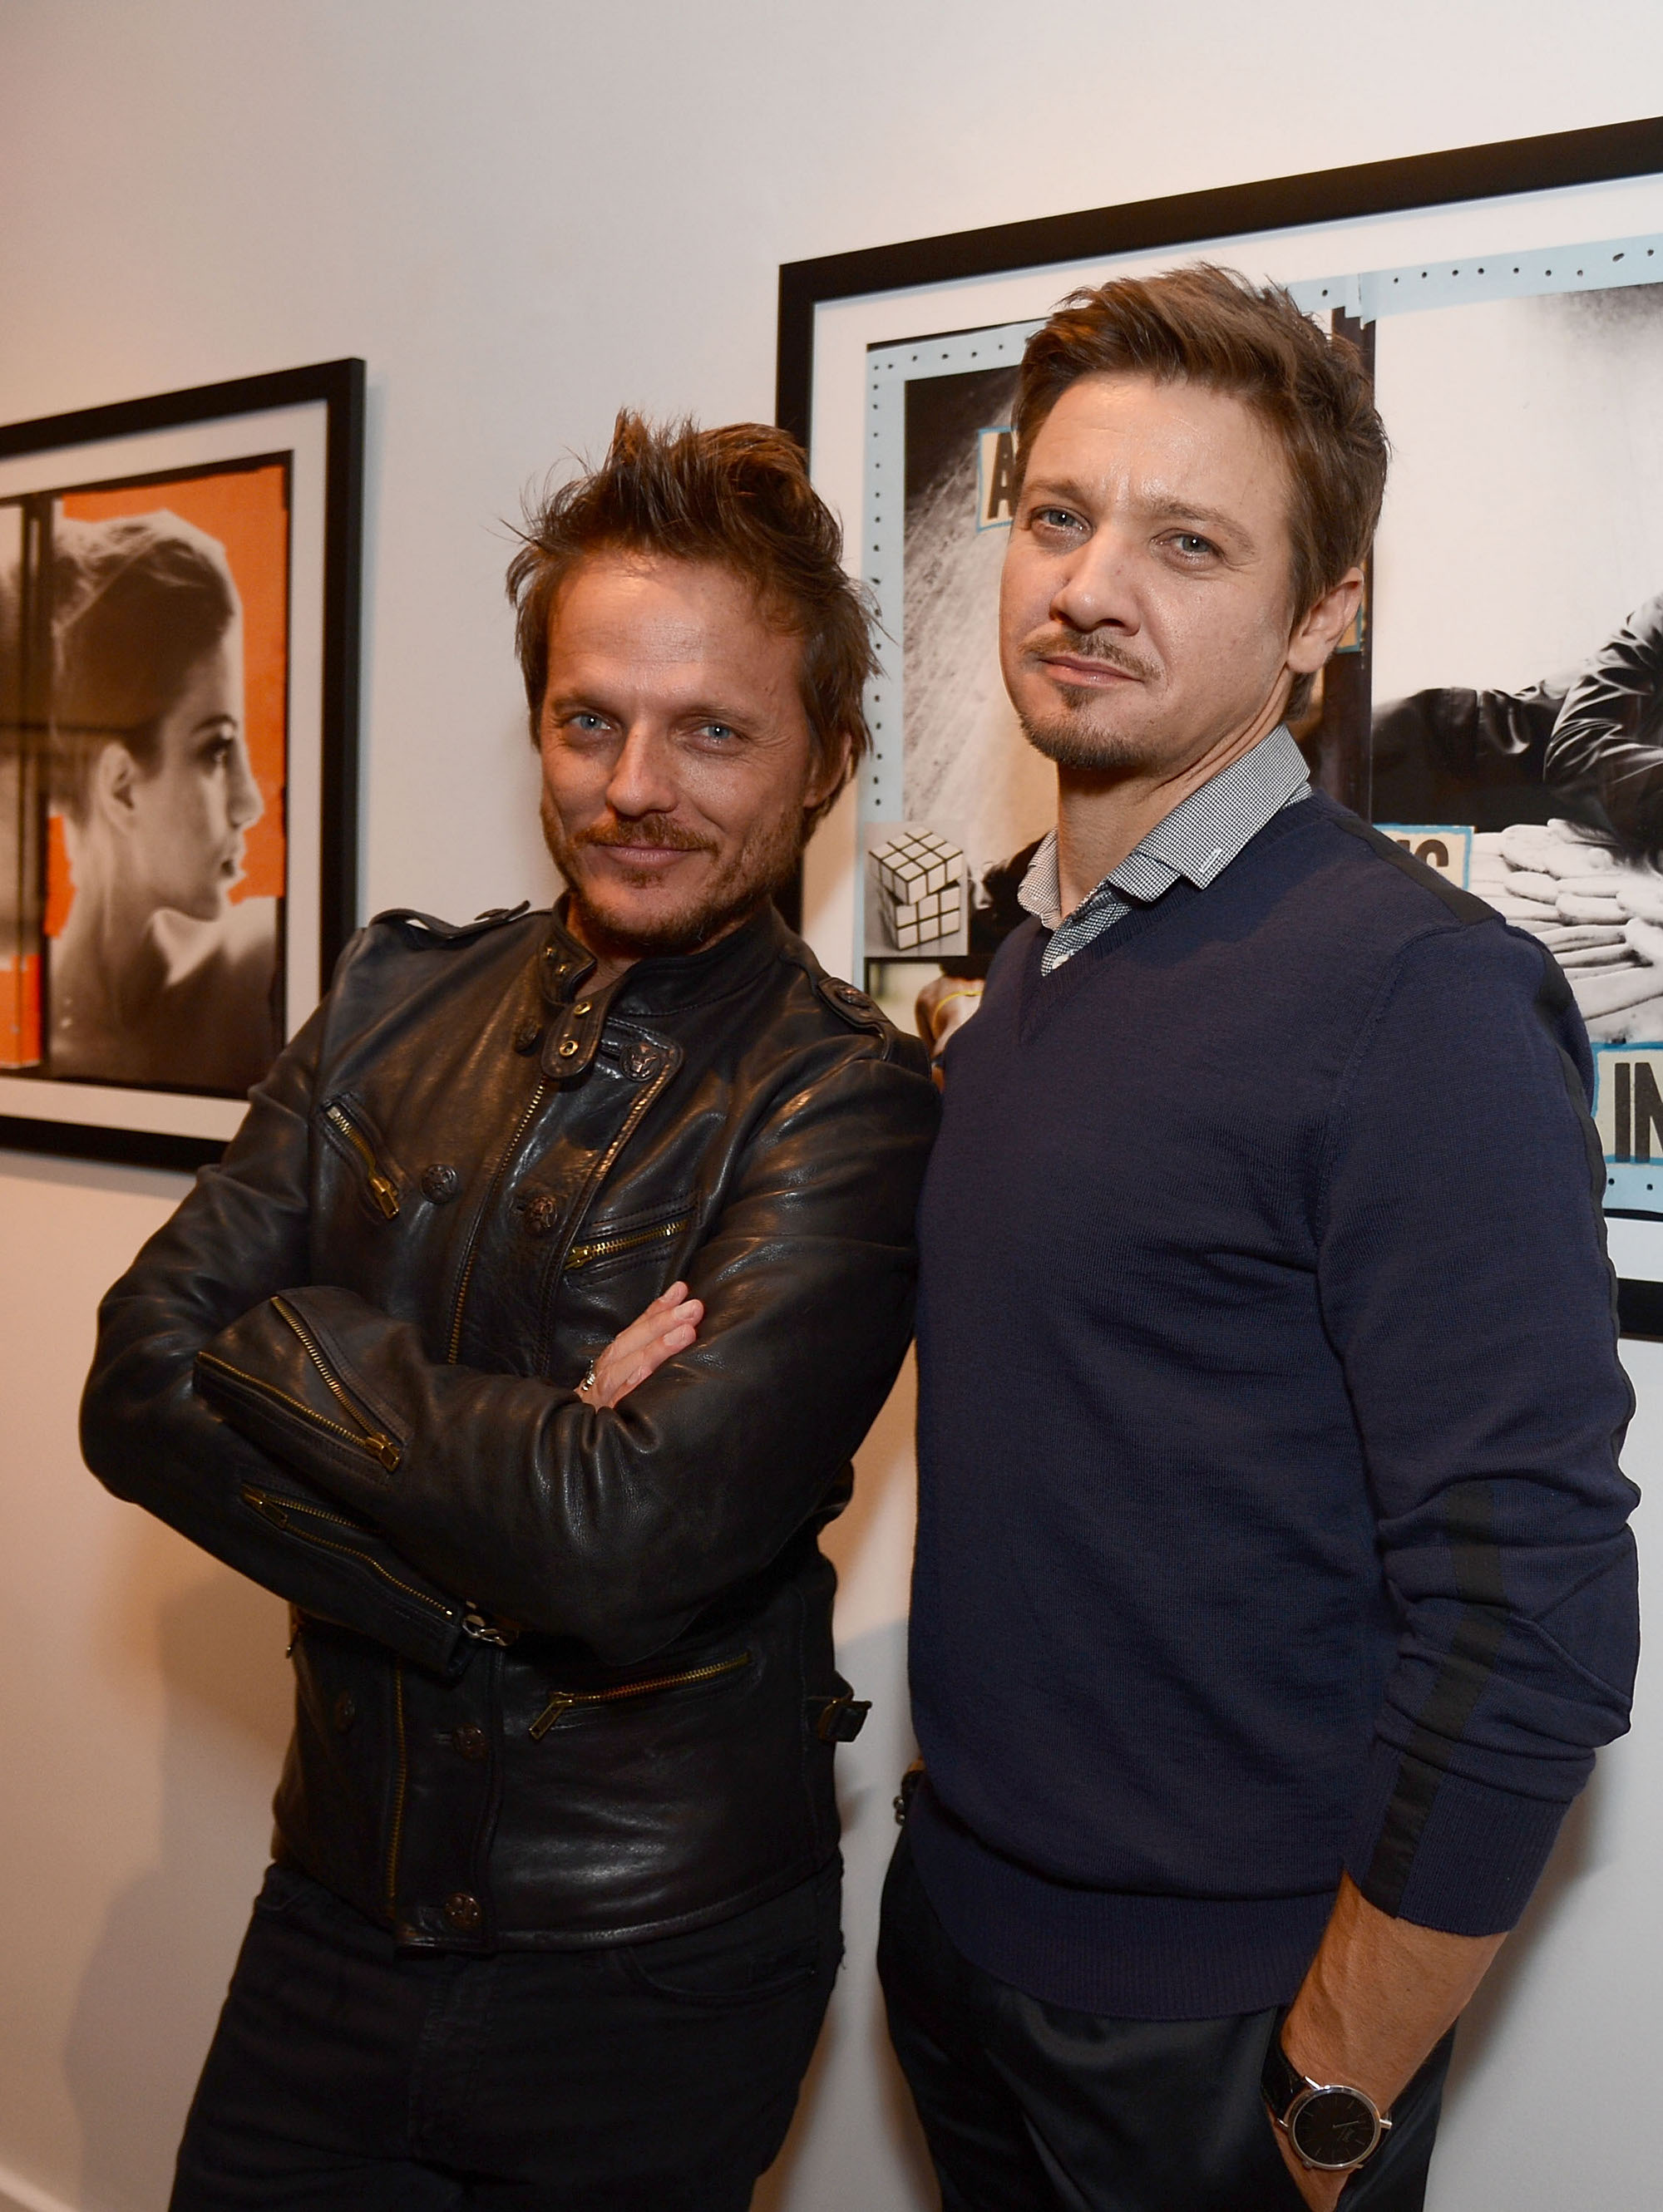 Jeremy Renner Wetdreams Randall Slavin Photo Exhibition Opening Party Usa 12 12 06 Jeremy Renner Daily ジェレミー レナー通信